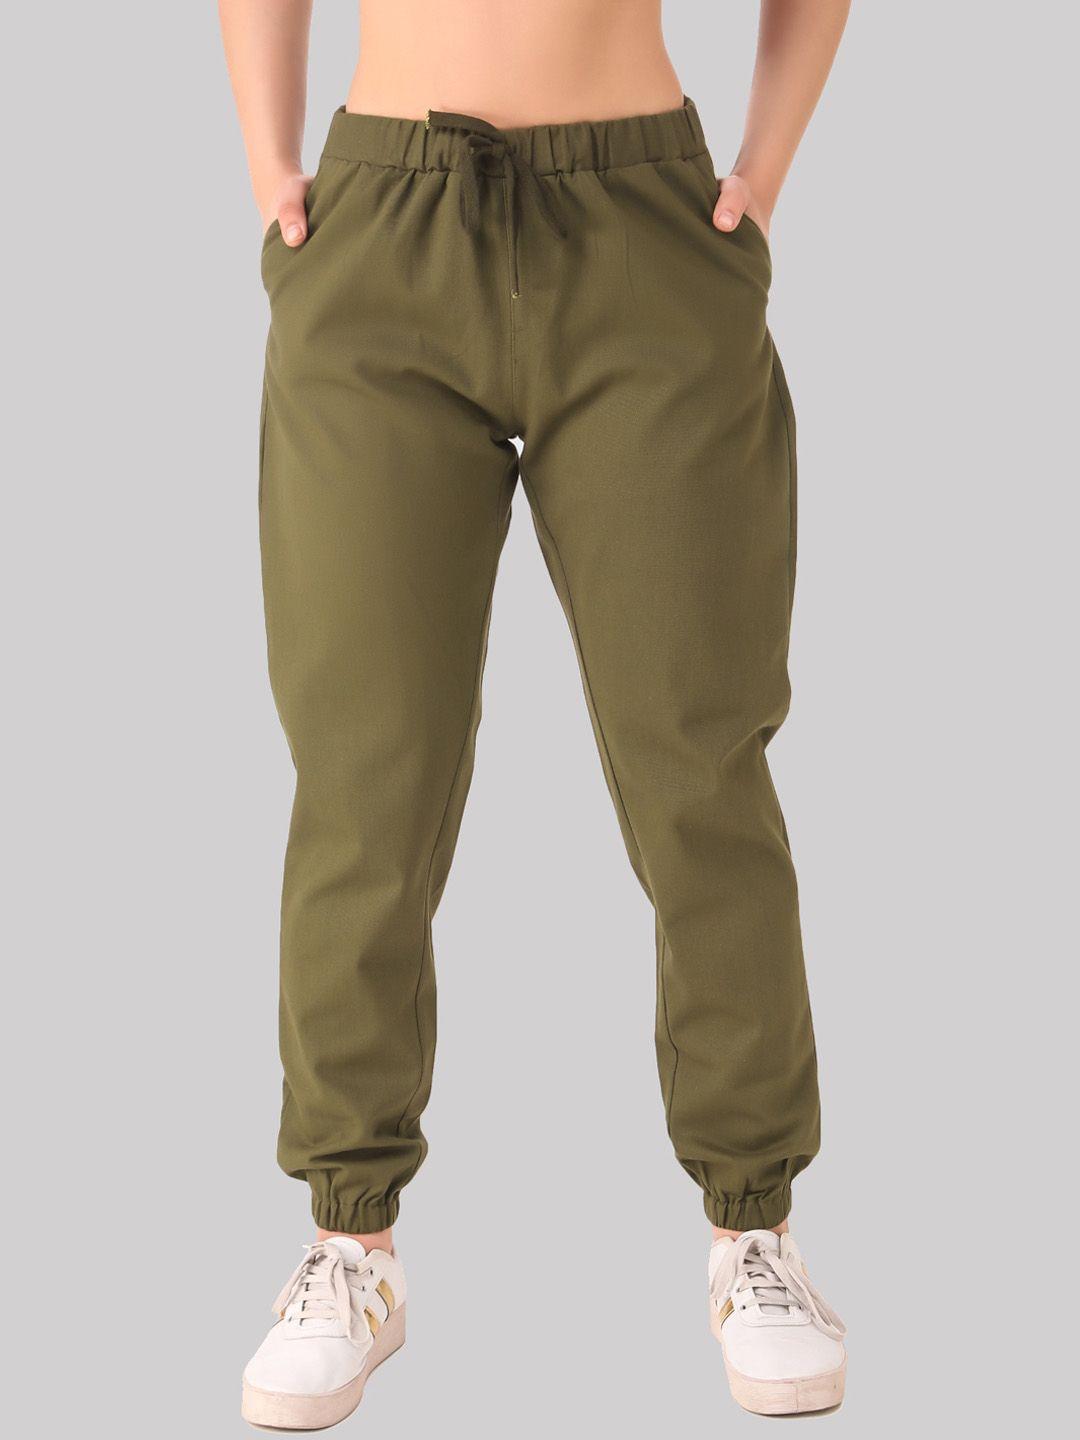 q-rious women olive green joggers trousers